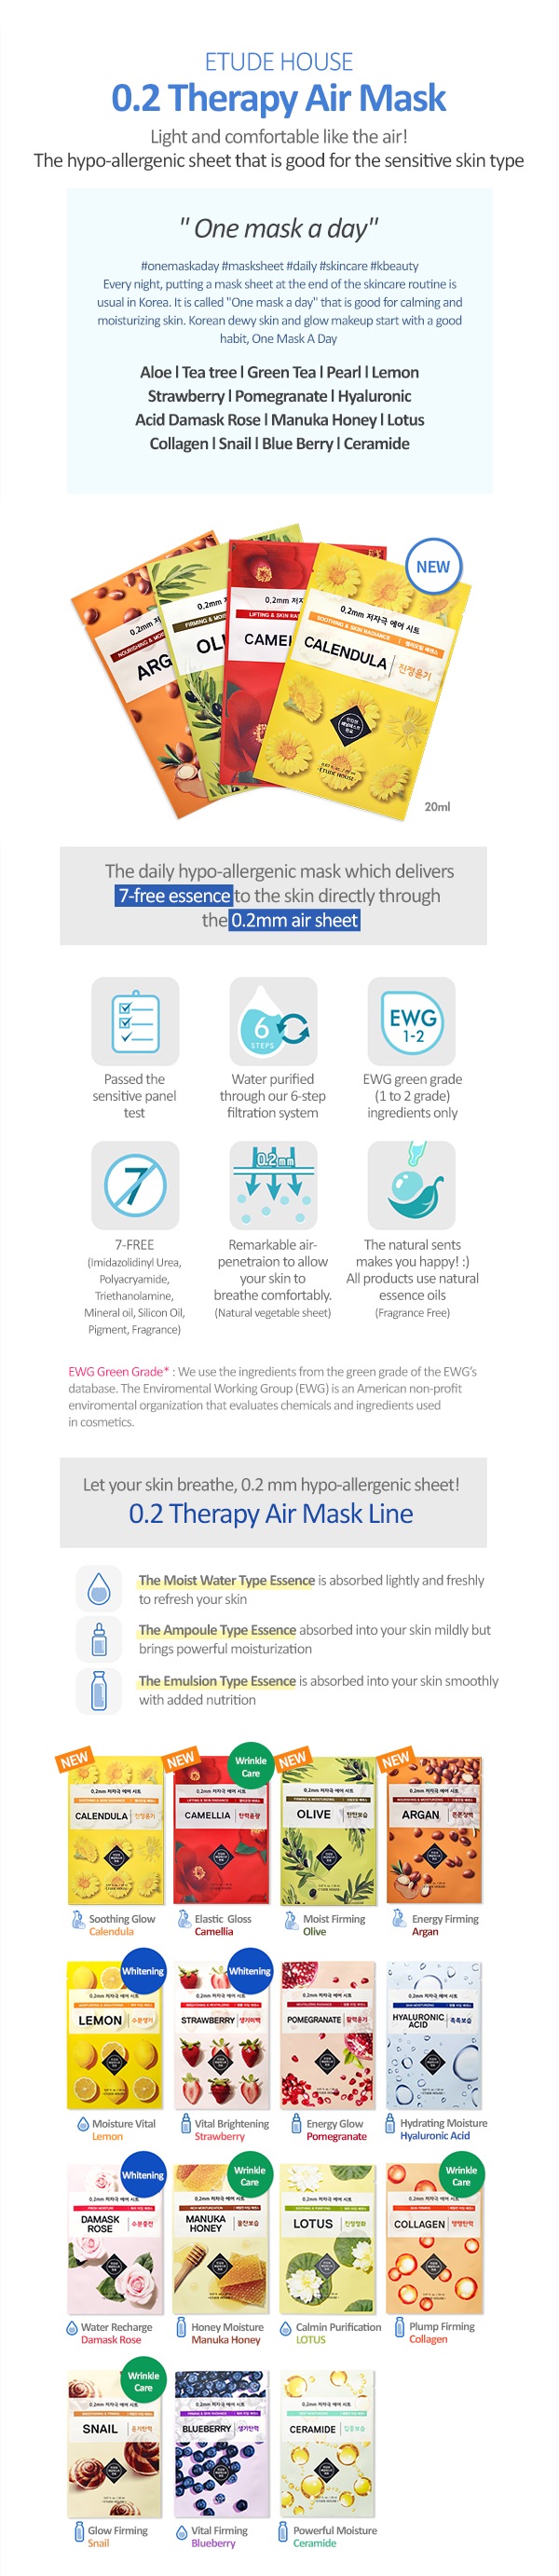 Etude House - 0.2 Therapy Air Mask